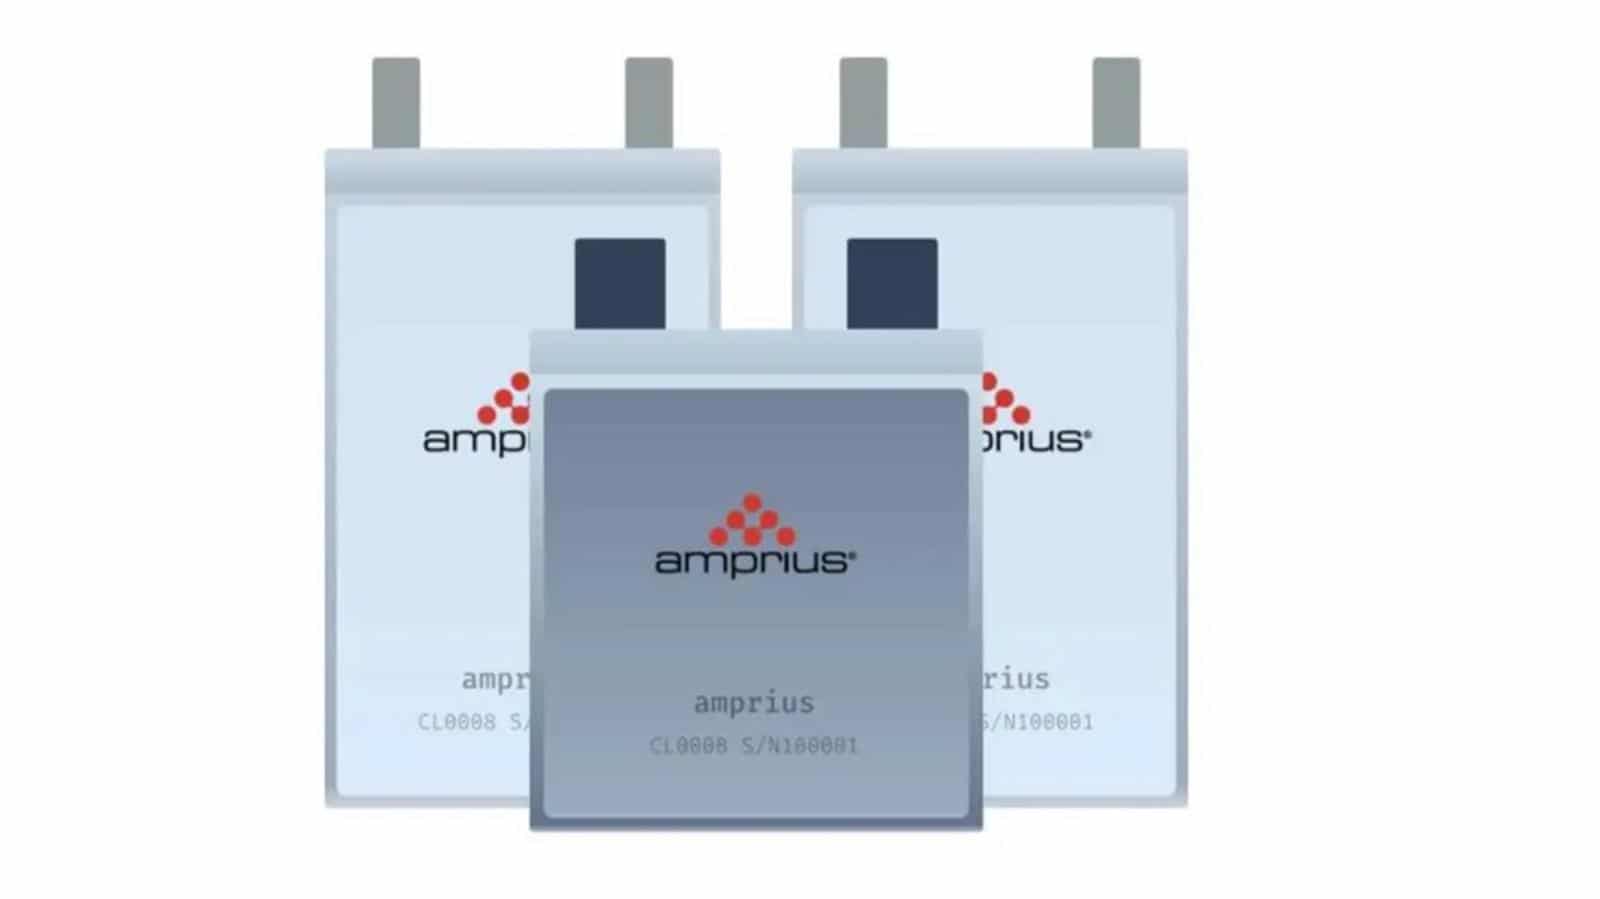 Amprius boasts of extremely fast battery charging